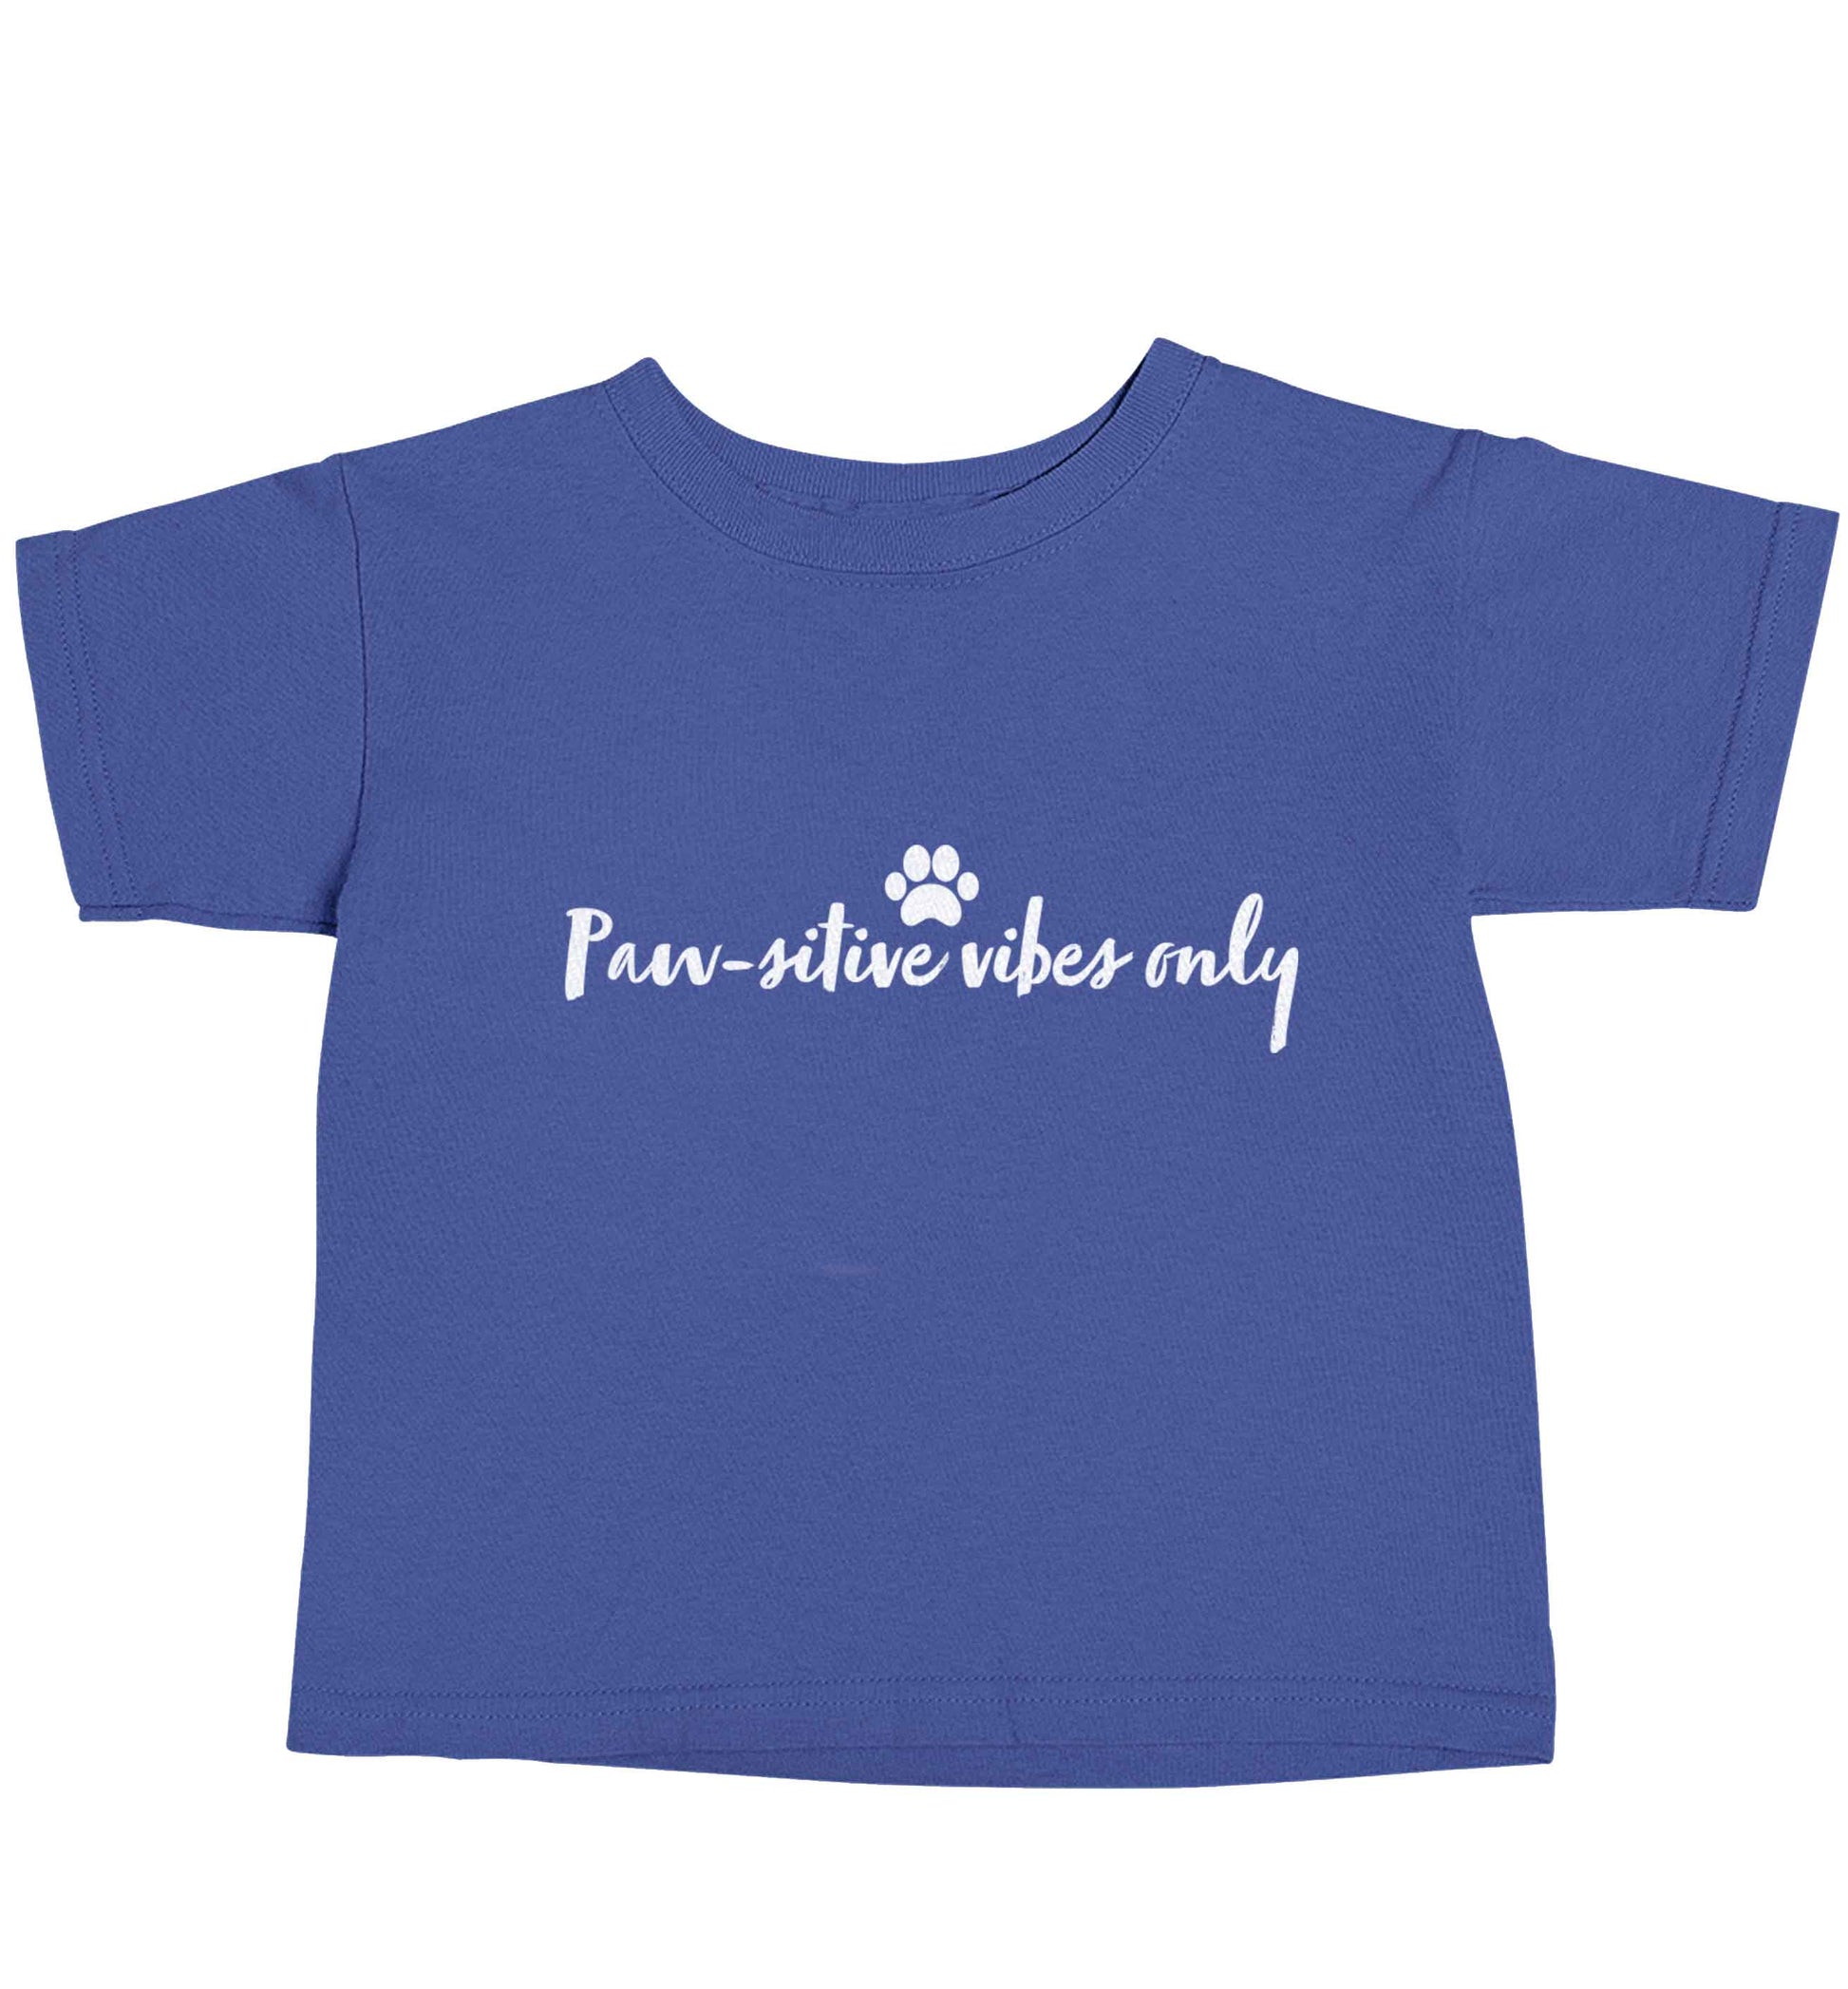 Pawsitive vibes only Kit blue baby toddler Tshirt 2 Years